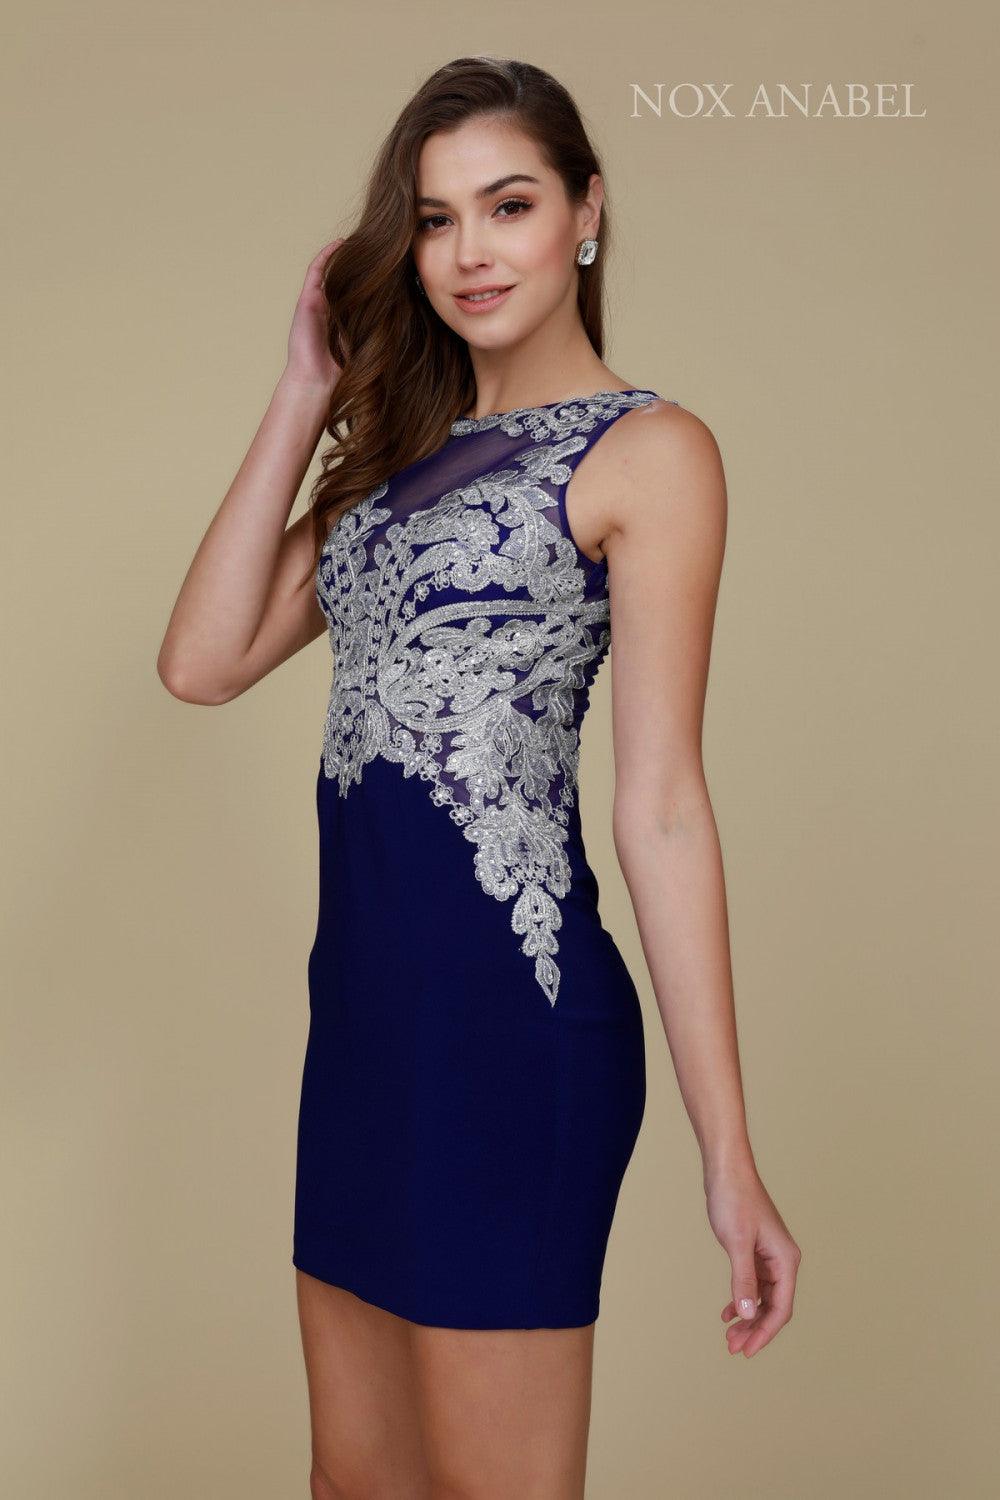 Short Sleeveless Fitted Formal Prom Dress - The Dress Outlet Nox Anabel